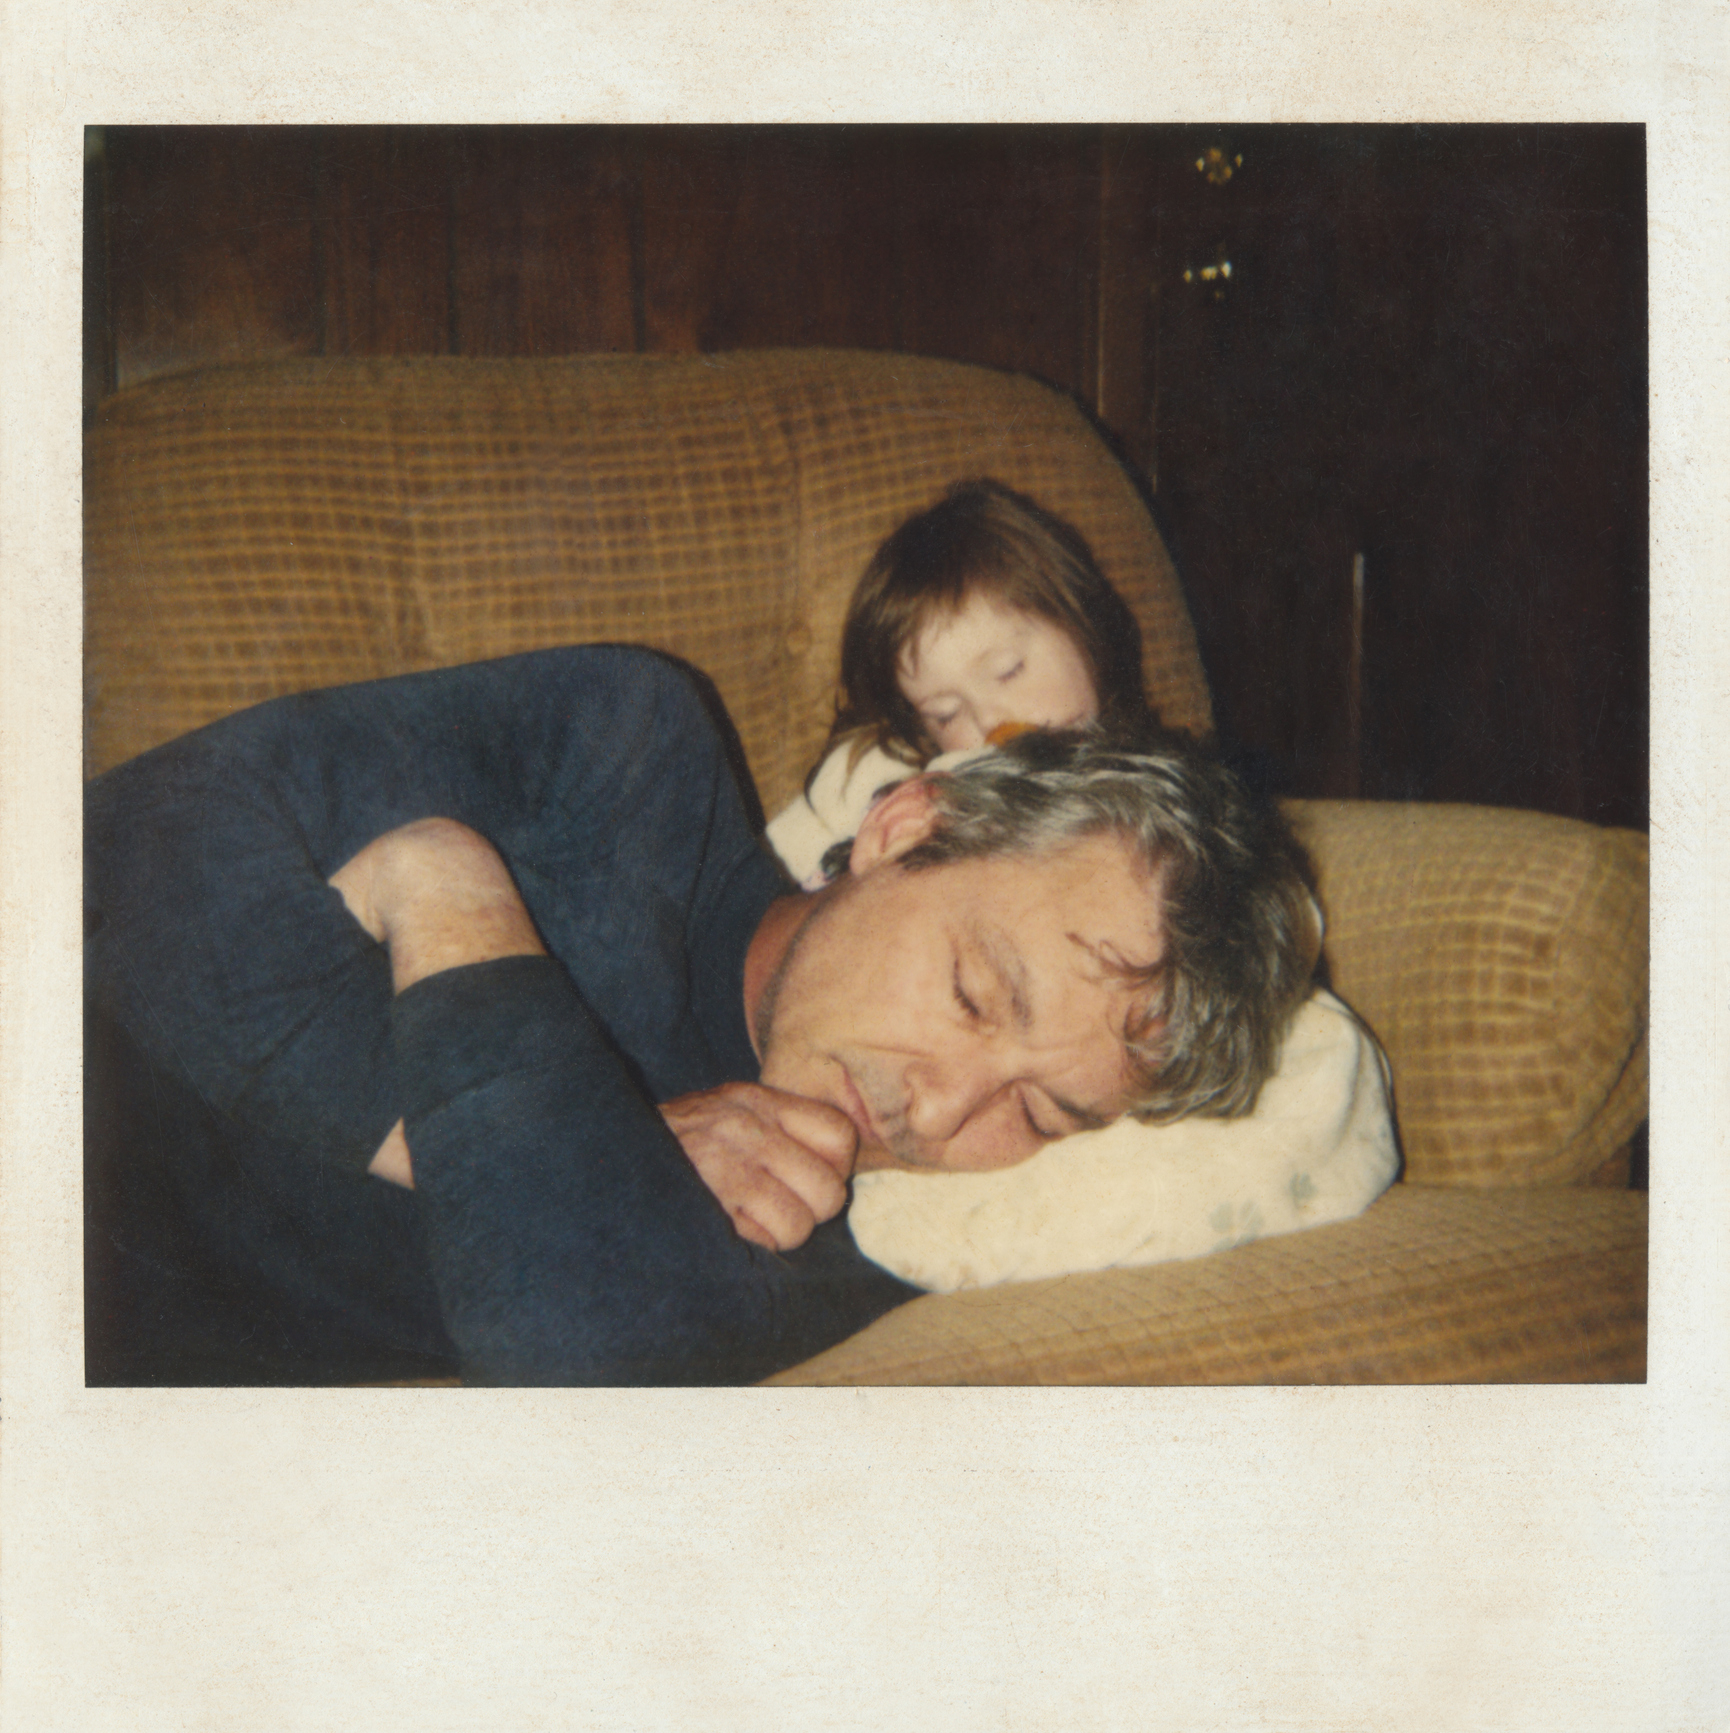 father and daughter asleep on the couch